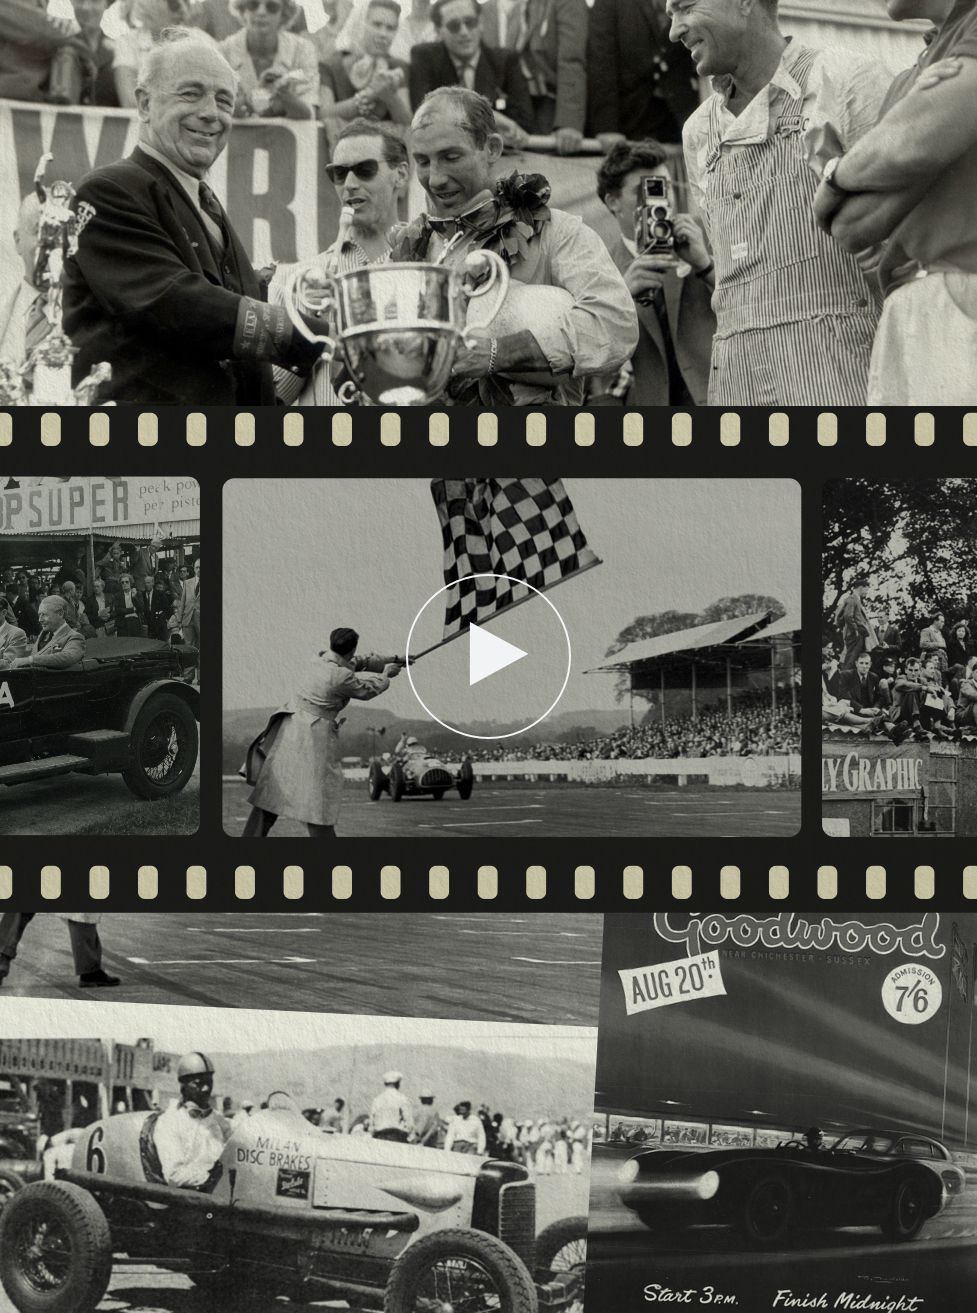 <strong>REQUIEM FOR A SPEED RACER</strong><br/><span>Memorabilia, scenes from Goodwood, and trackside snapshots of legendary drivers Rajo Jack (bottom right) and Stirling Moss with Carroll Shelby (top right) from the golden age of Grand Prix car racing.  </span><br/><span>Watch the video that tells the story behind the collection. </span><br/><span class="caption-sub"><em>Images courtesy of Goodwood </em> </span><br/><a href="https://www.youtube.com/watch?v=UrepM2g1pl4" target="_blank" class="rlc-linecta rlc-lineplay"><span>WATCH THE VIDEO</span></a>